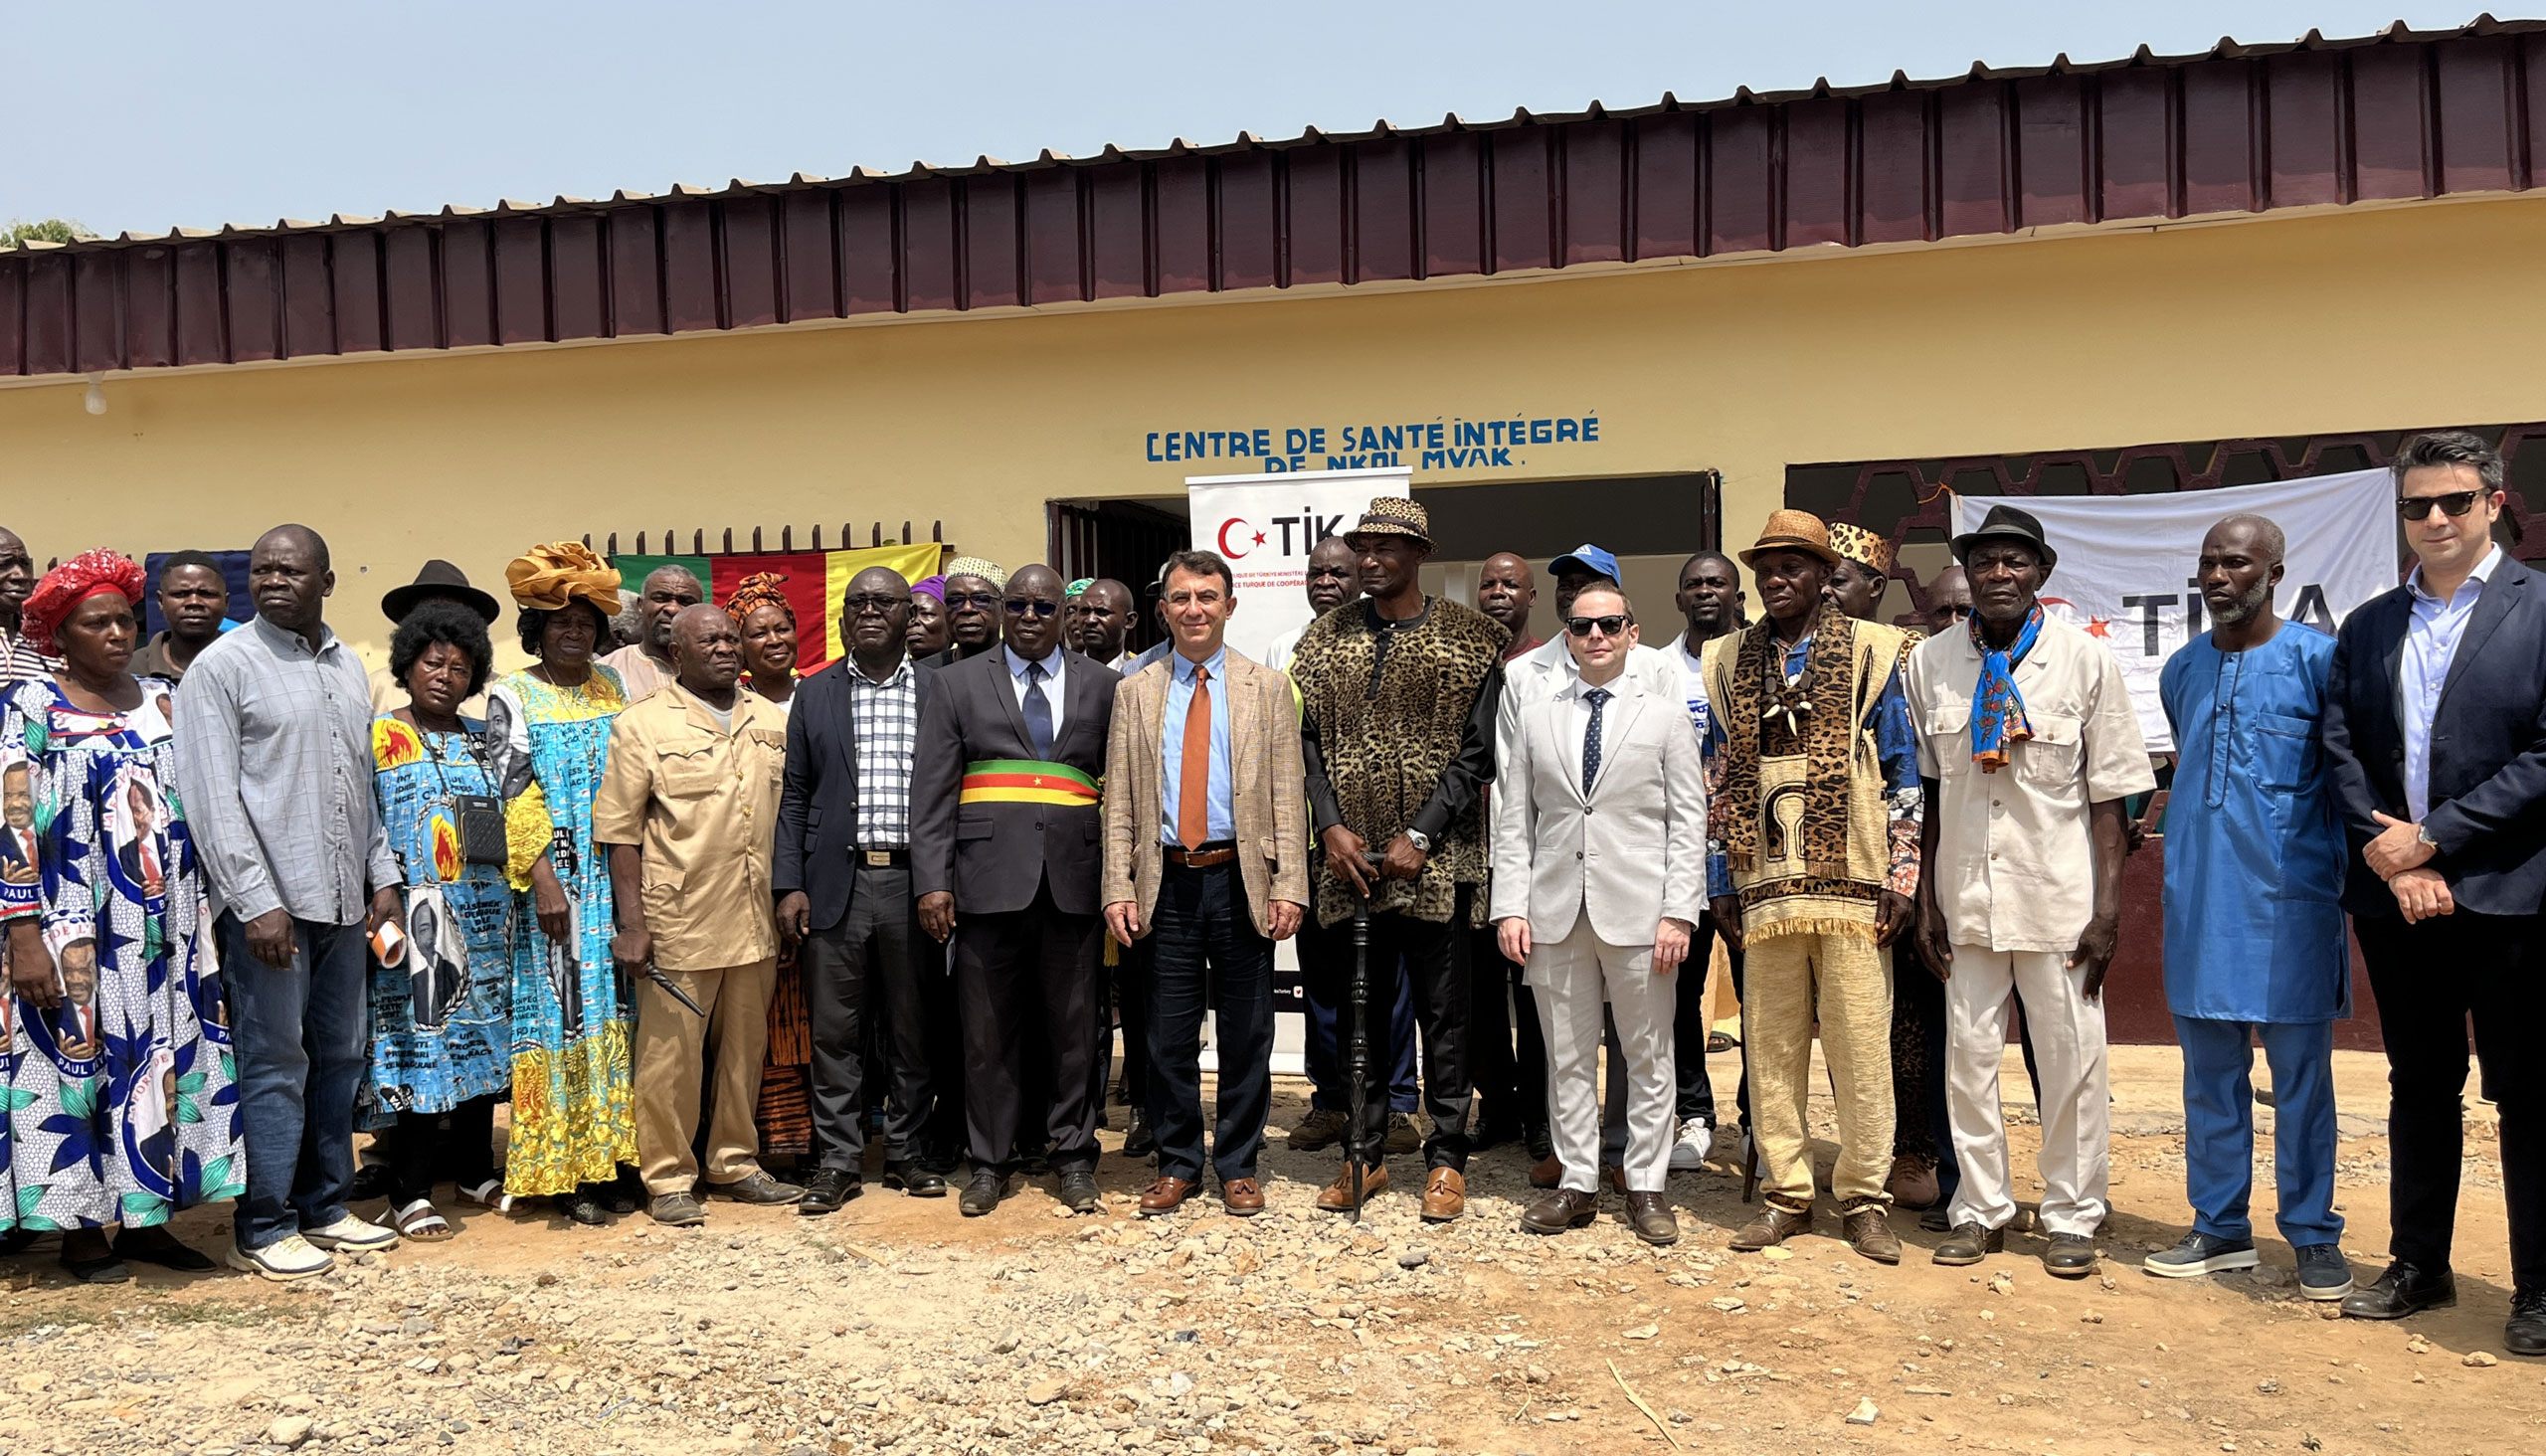 TİKA Renovated a Health Center to Serve Over 15,000 People Annually in Cameroon